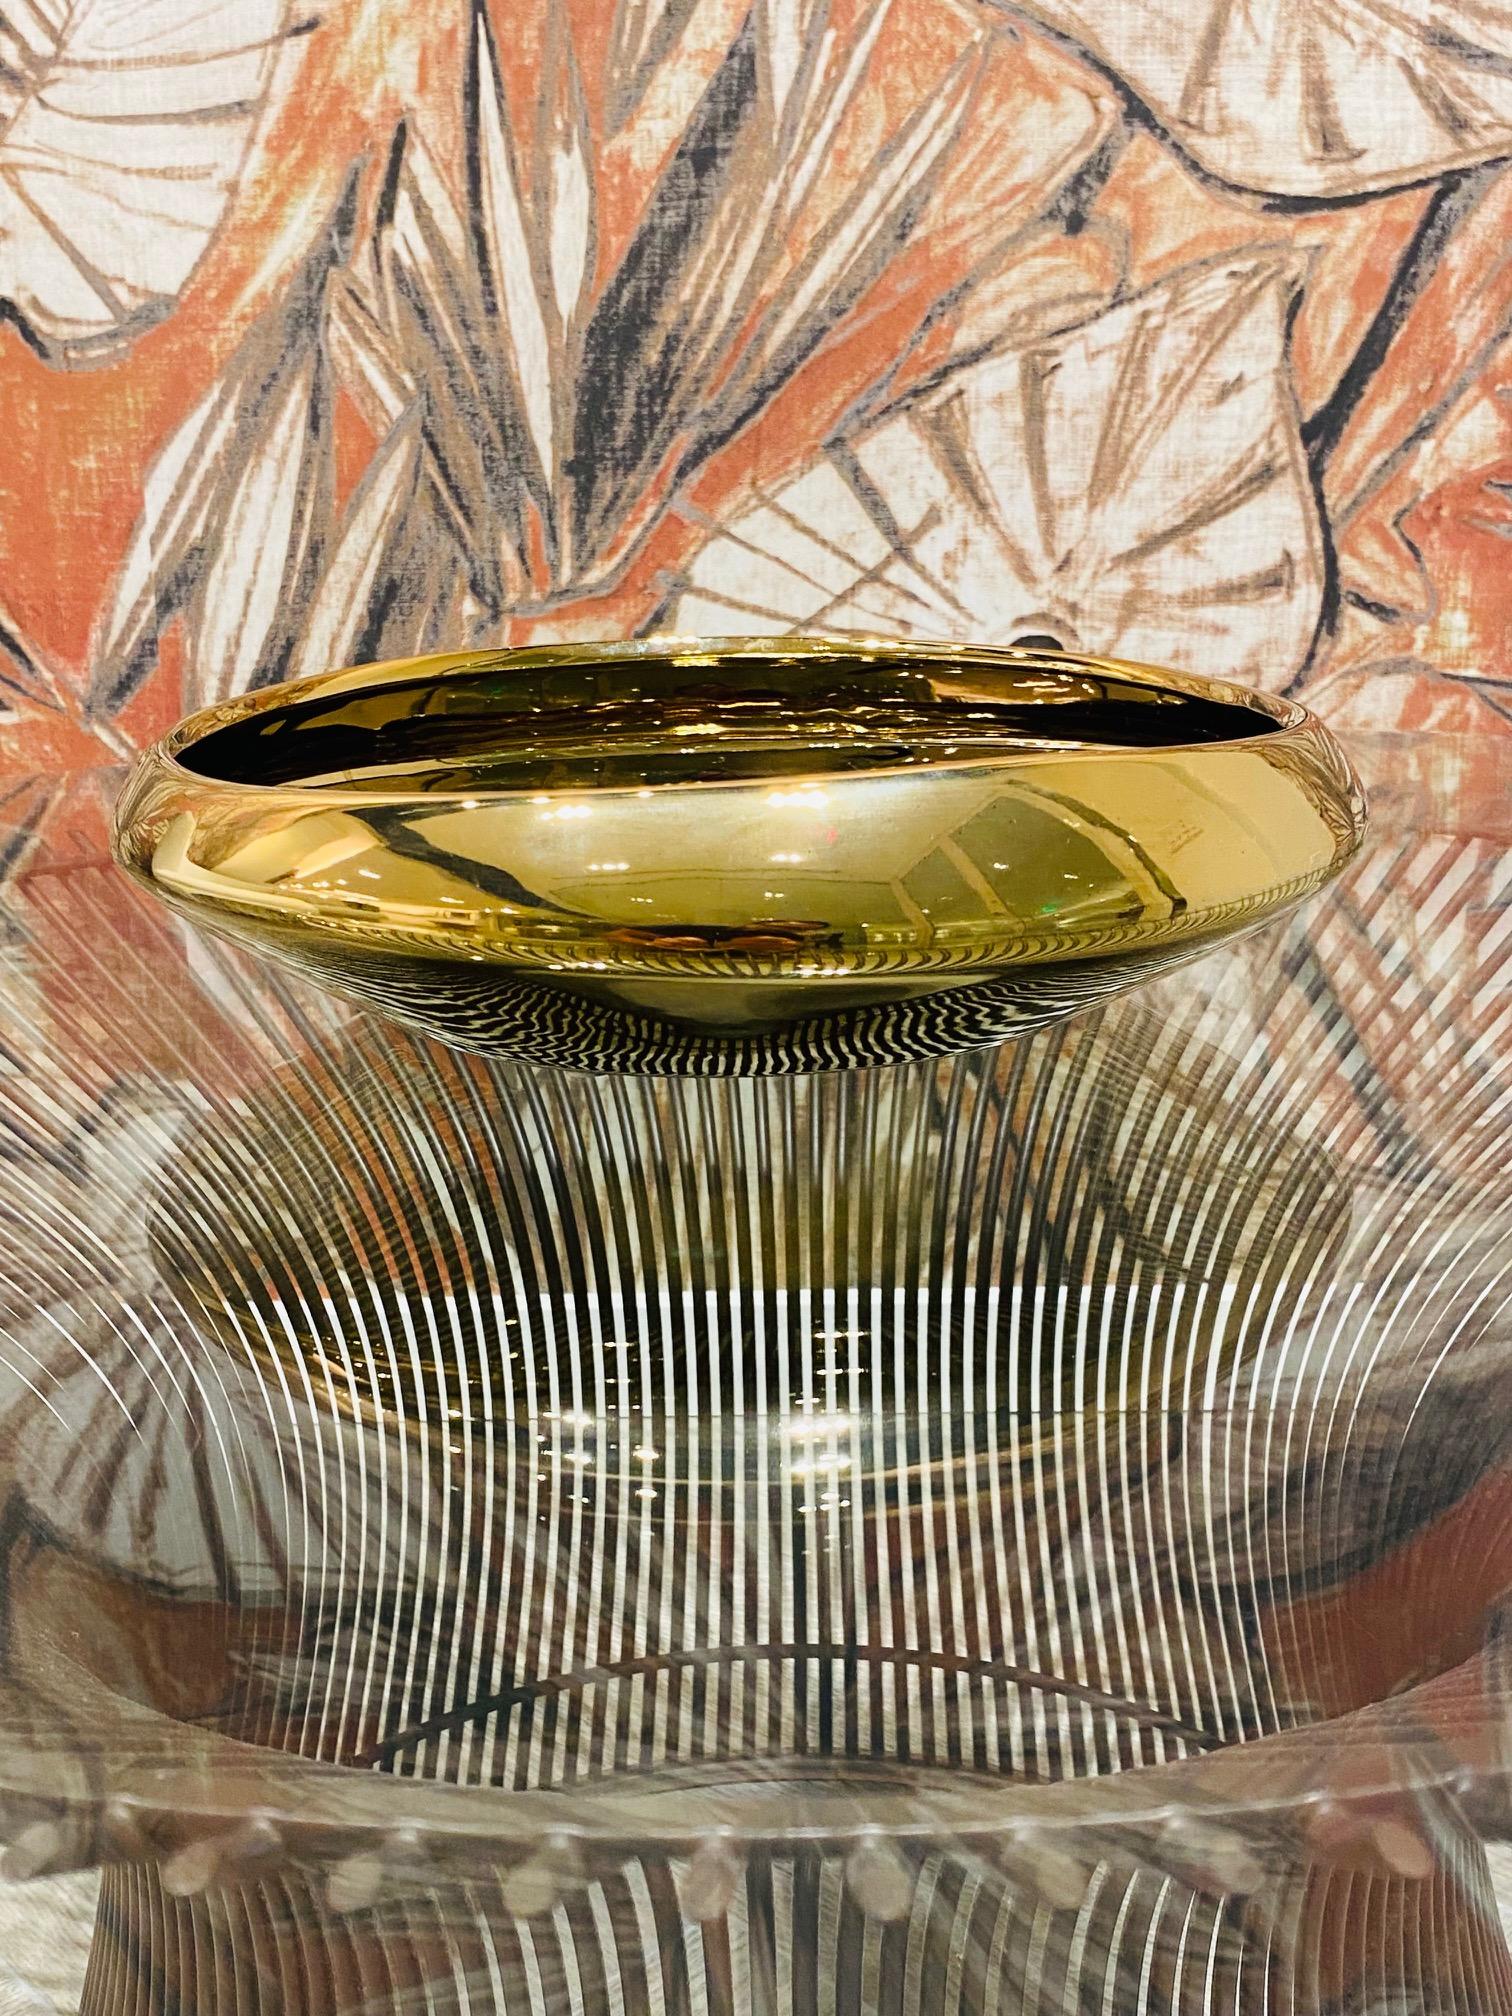 Vintage ceramic centerpiece or decorative bowl featuring an organic abstract form. The ceramic bowl has a beautiful hand-applied reflective gold finish. Reminiscent of Danish Mid-Century Modern design. Stunning from all angles.